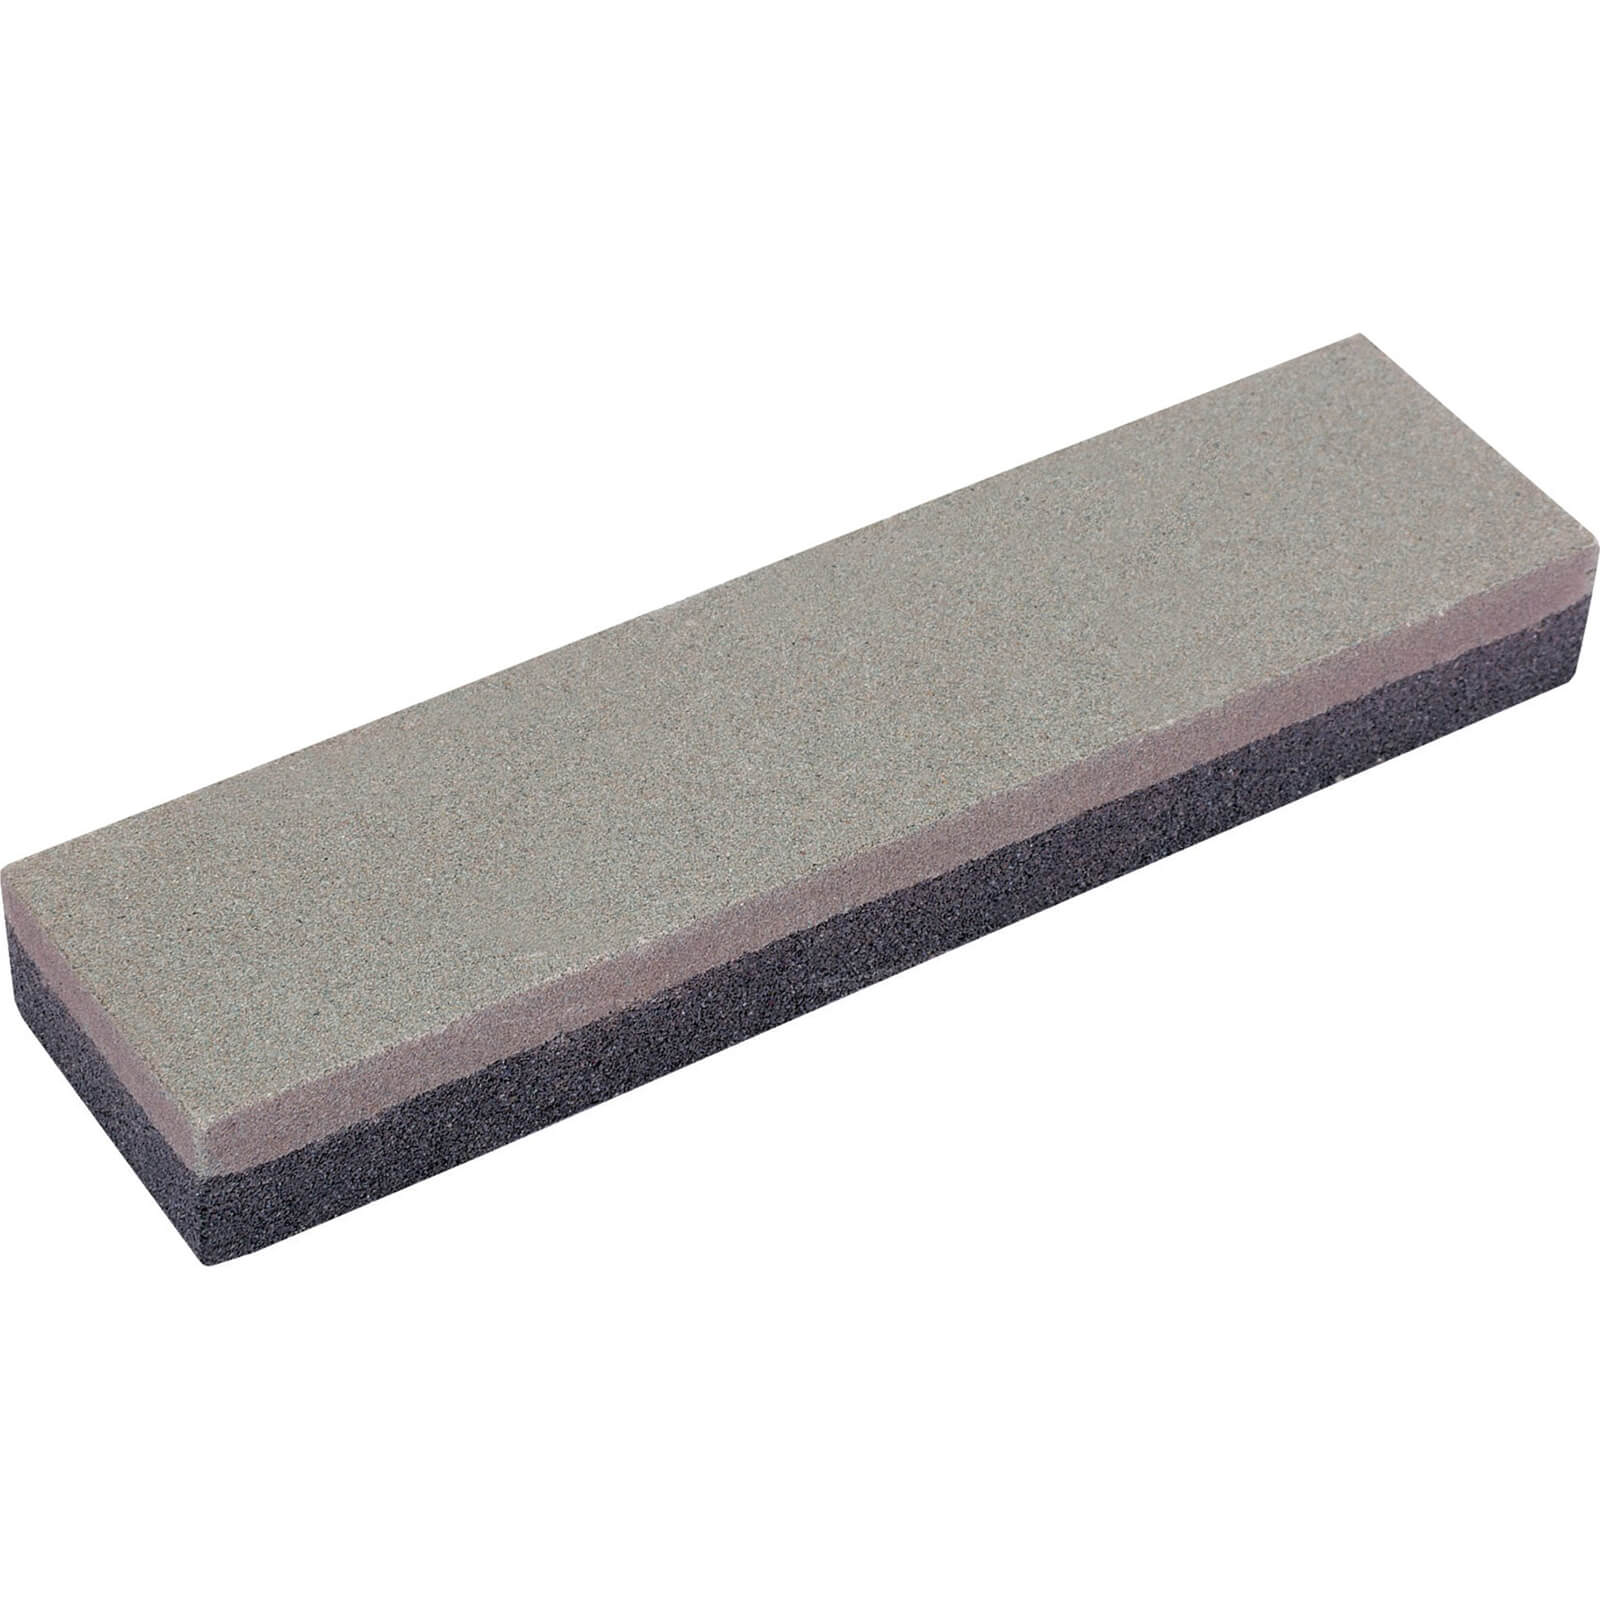 Image of Draper Silicone Carbide Sharpening Stone 100mm 25mm 12mm